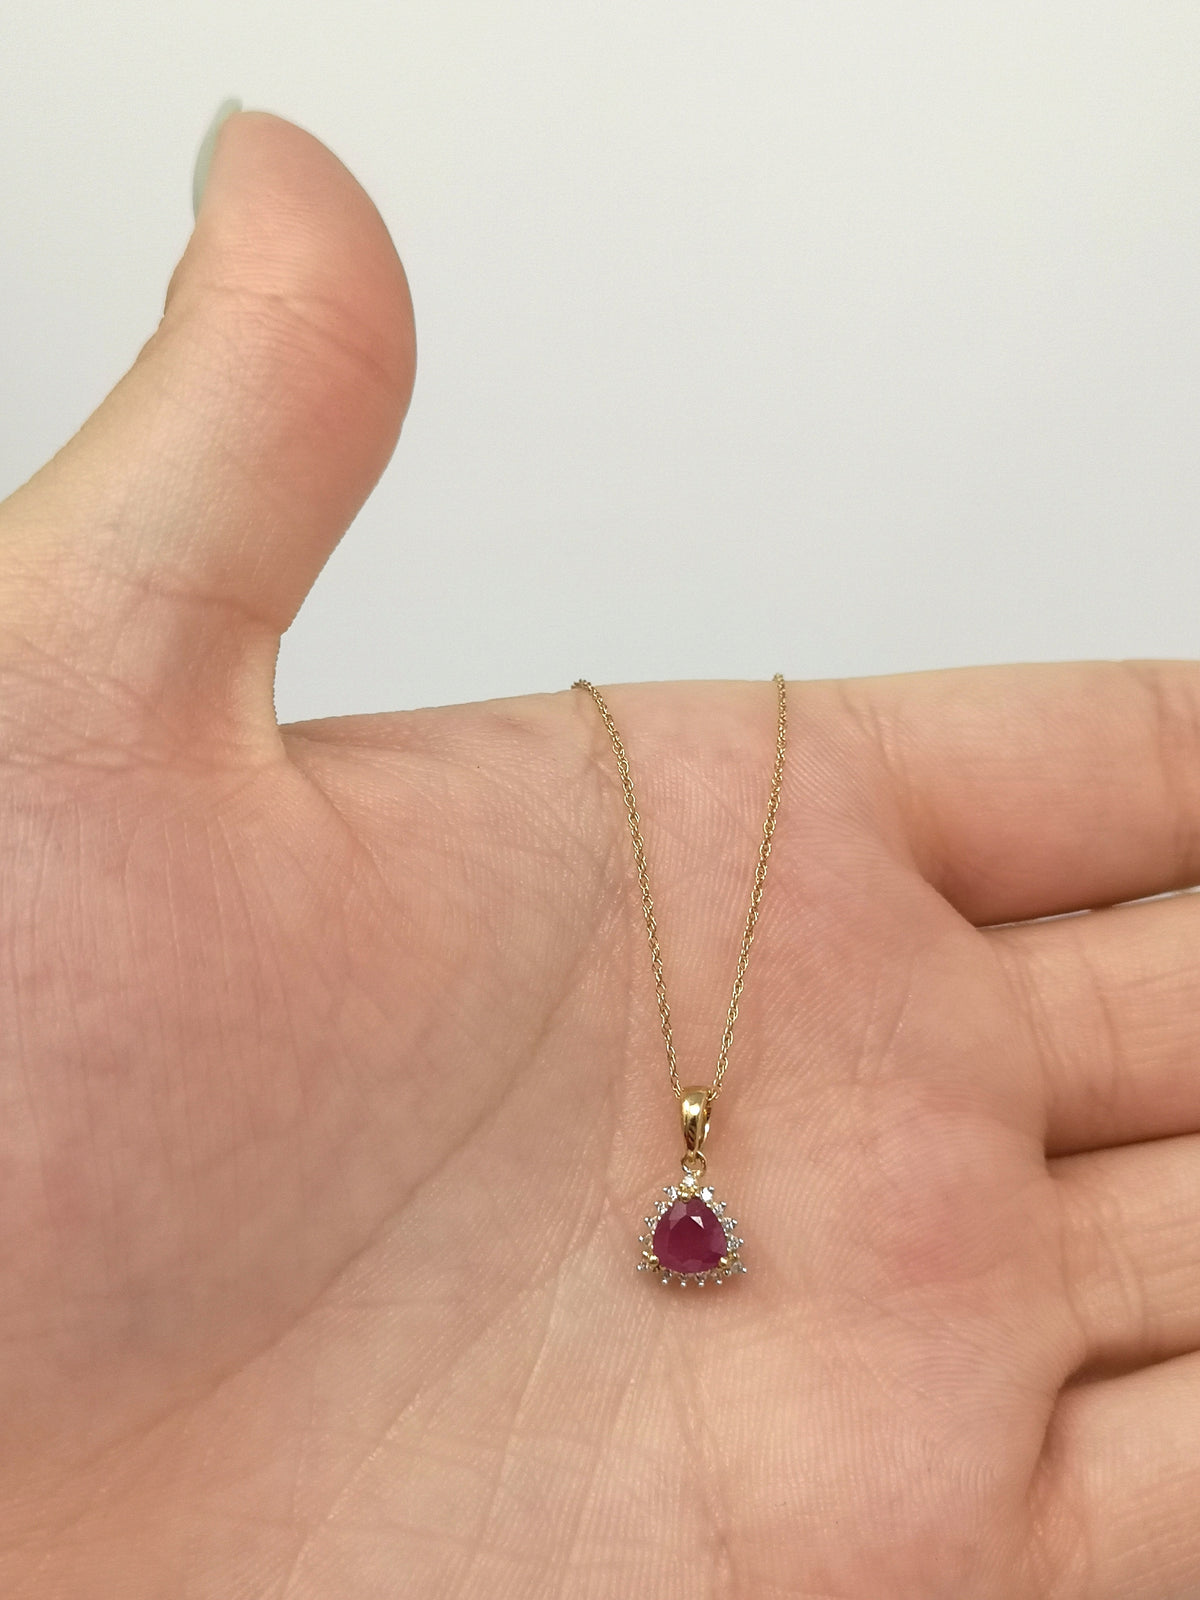 10K Yellow Gold Ruby and Diamond Necklace, 18&quot;